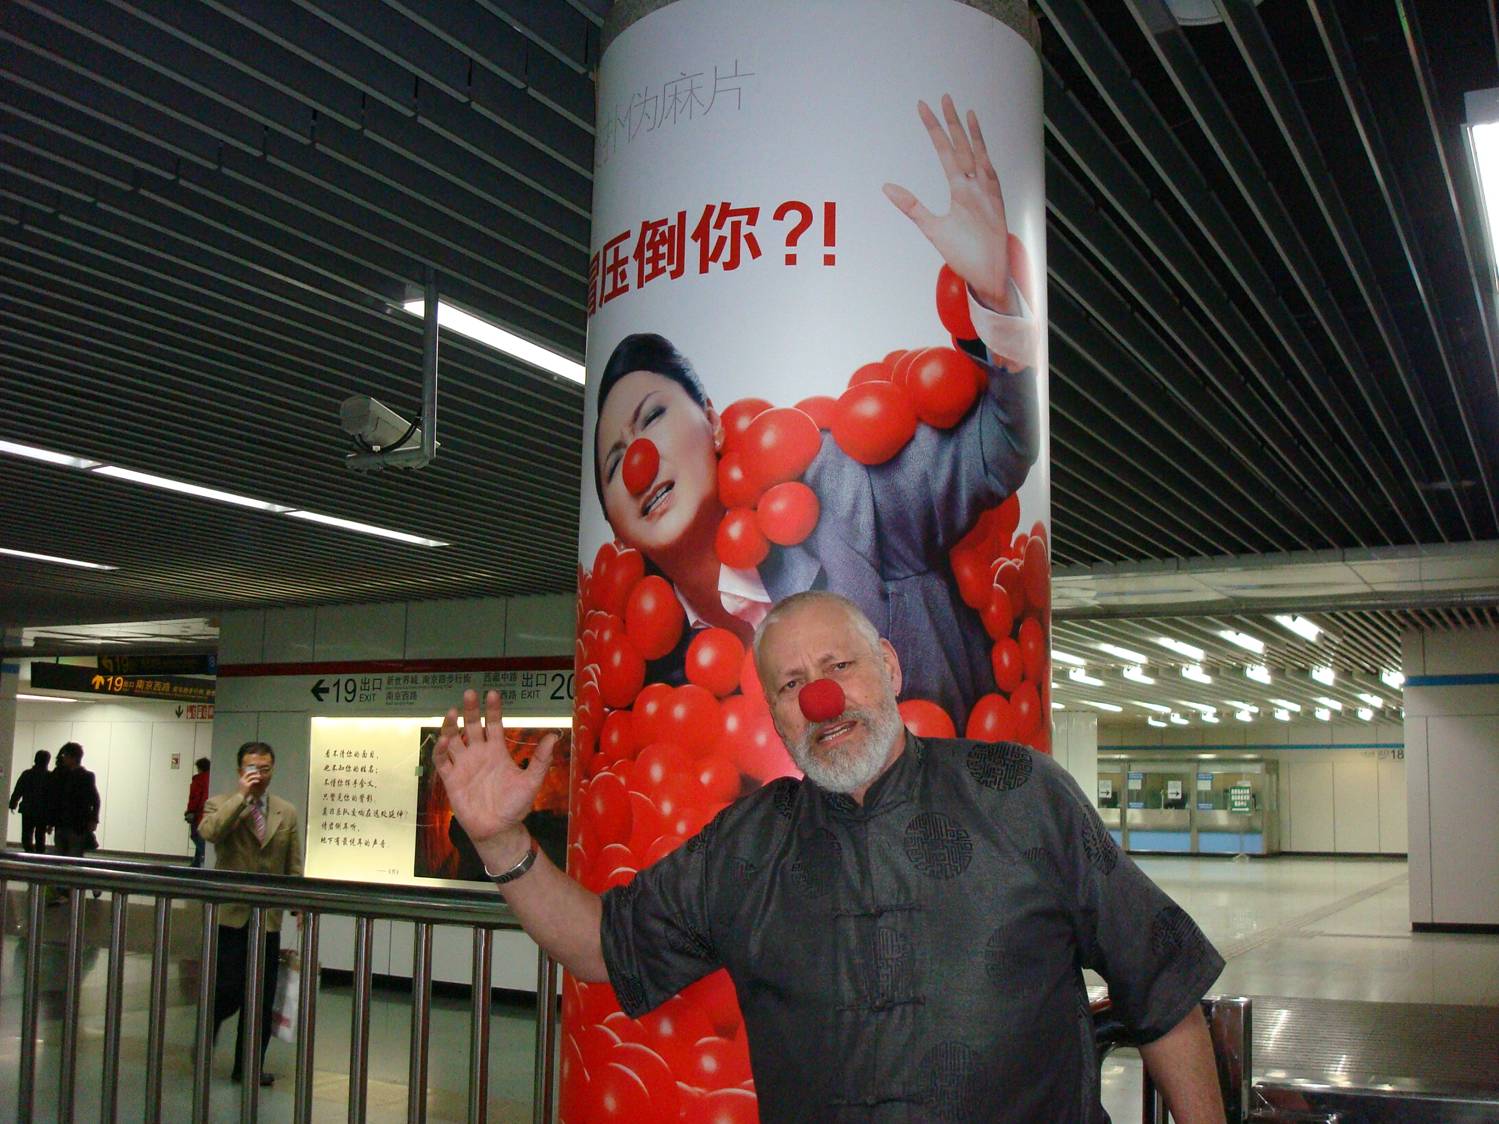 Shanghai subway station,  with clown.